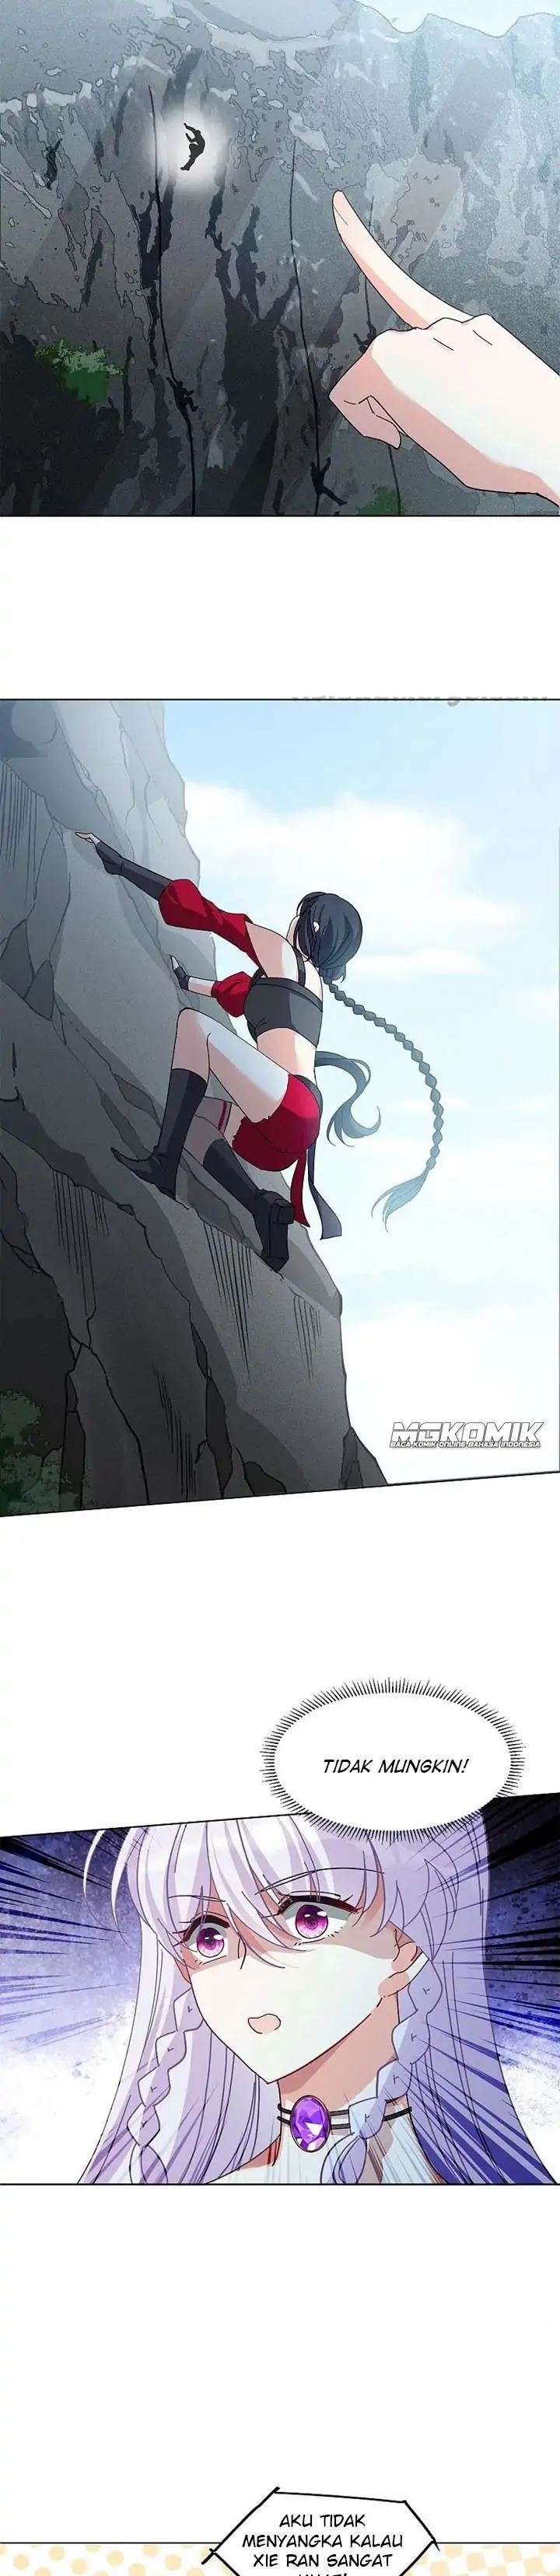 She Is Coming, Please Get Down! Chapter 41.3